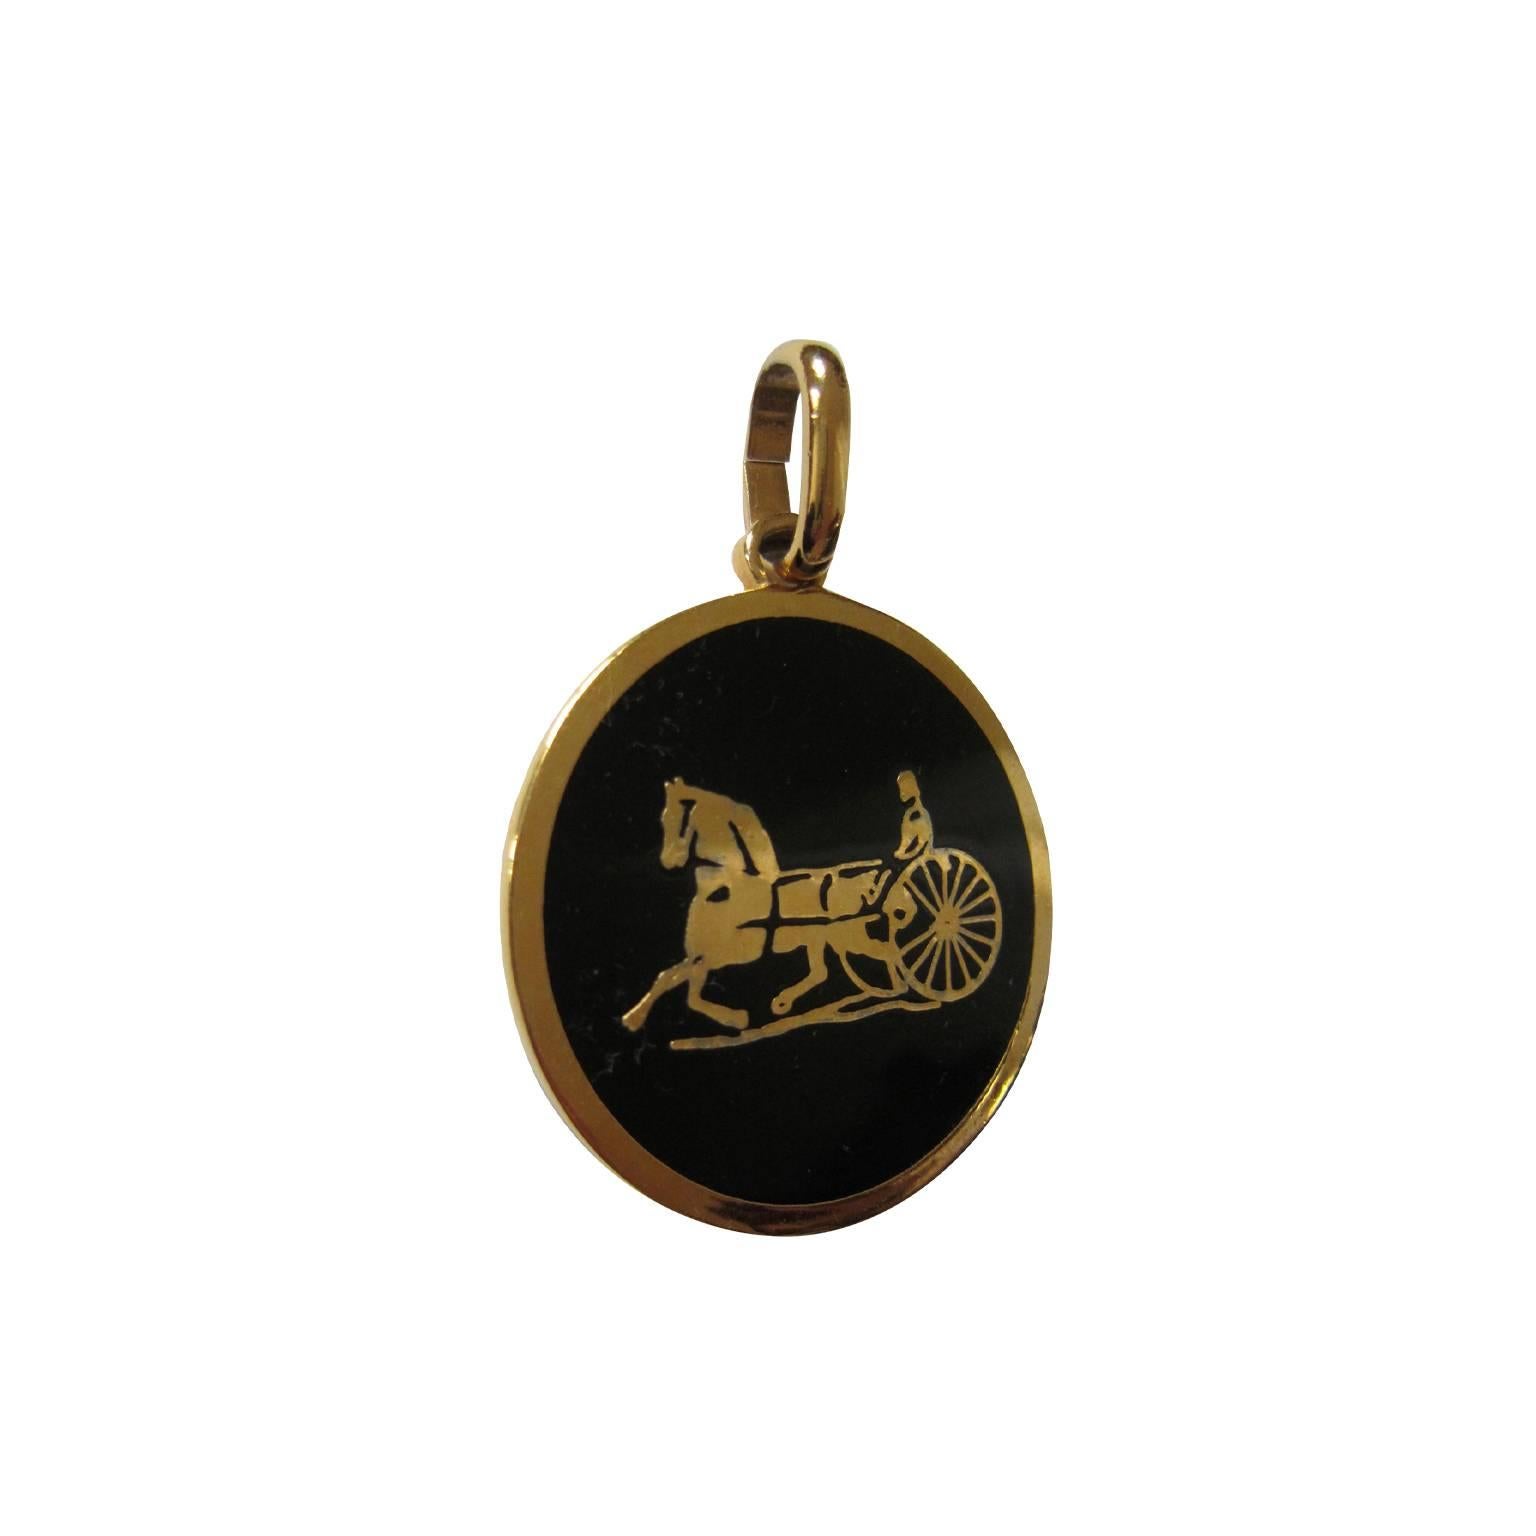 Celine medallion from circa 1970s, iconic horse carriage motief in black & gold. 
Gold logo embossed.
Measurements : 5 x 5 cm 